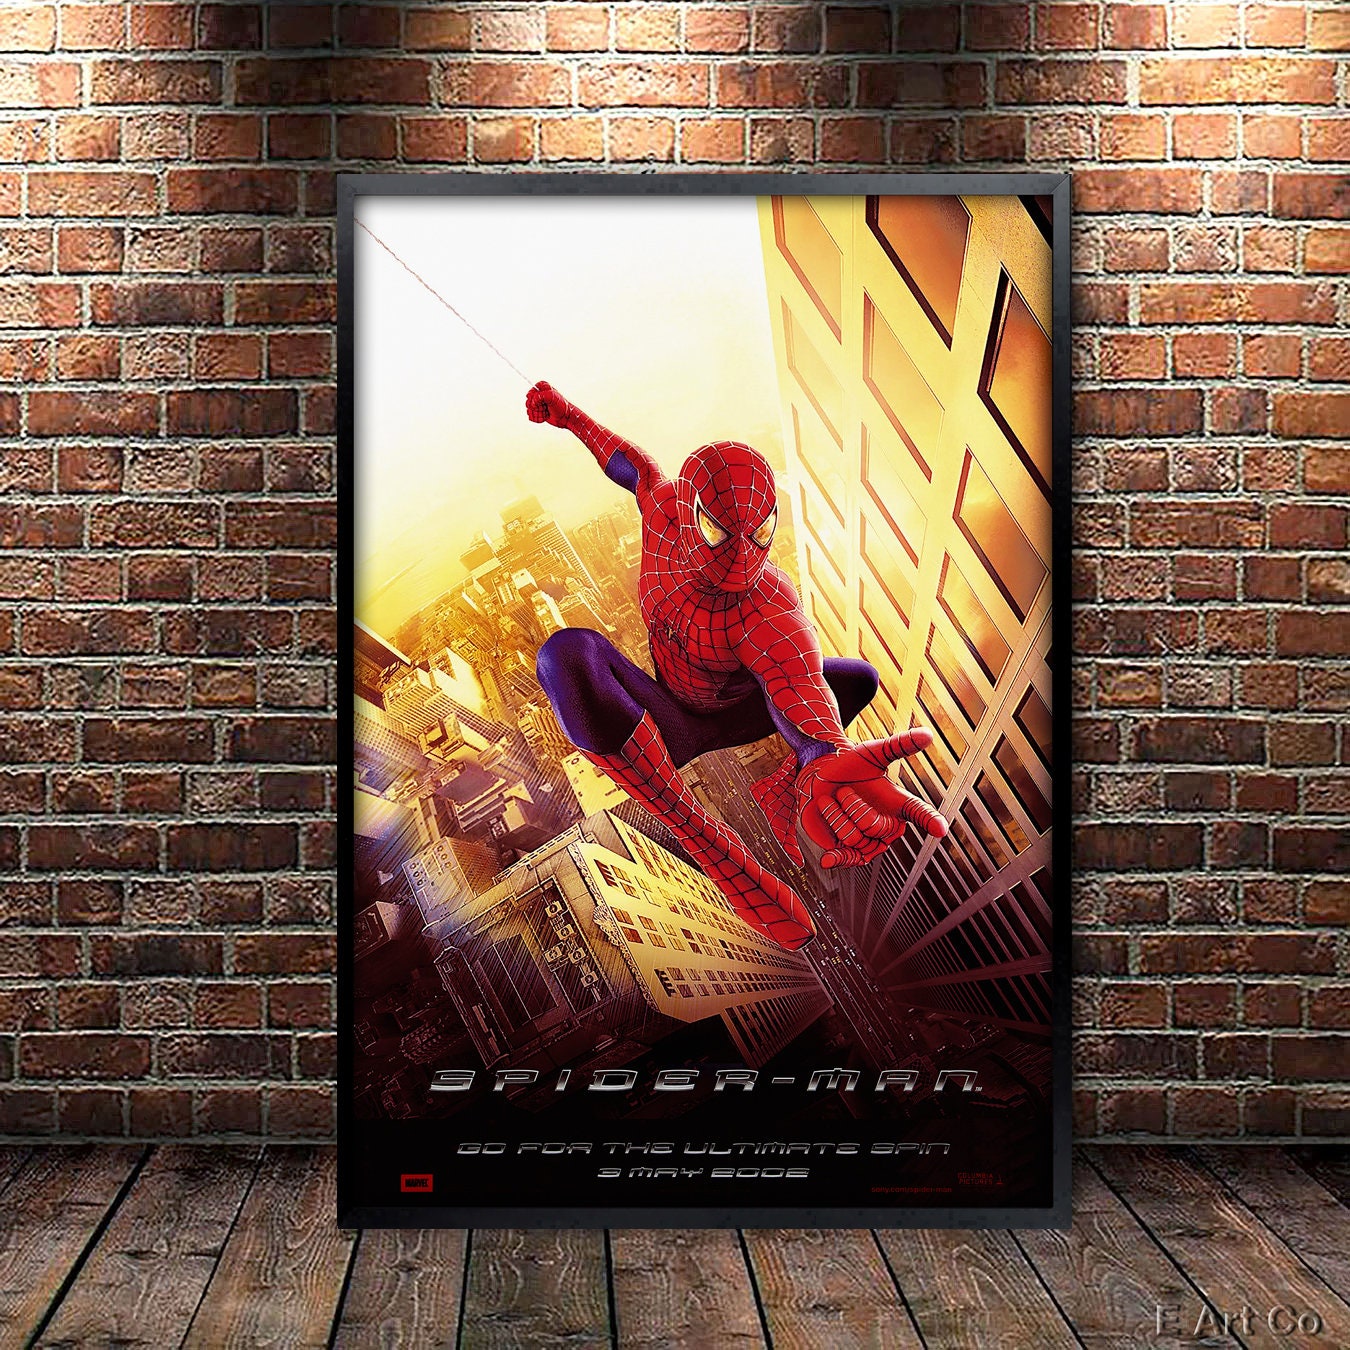 Spider-man 2002 Movie Poster Framed and Ready to Hang. -  Denmark